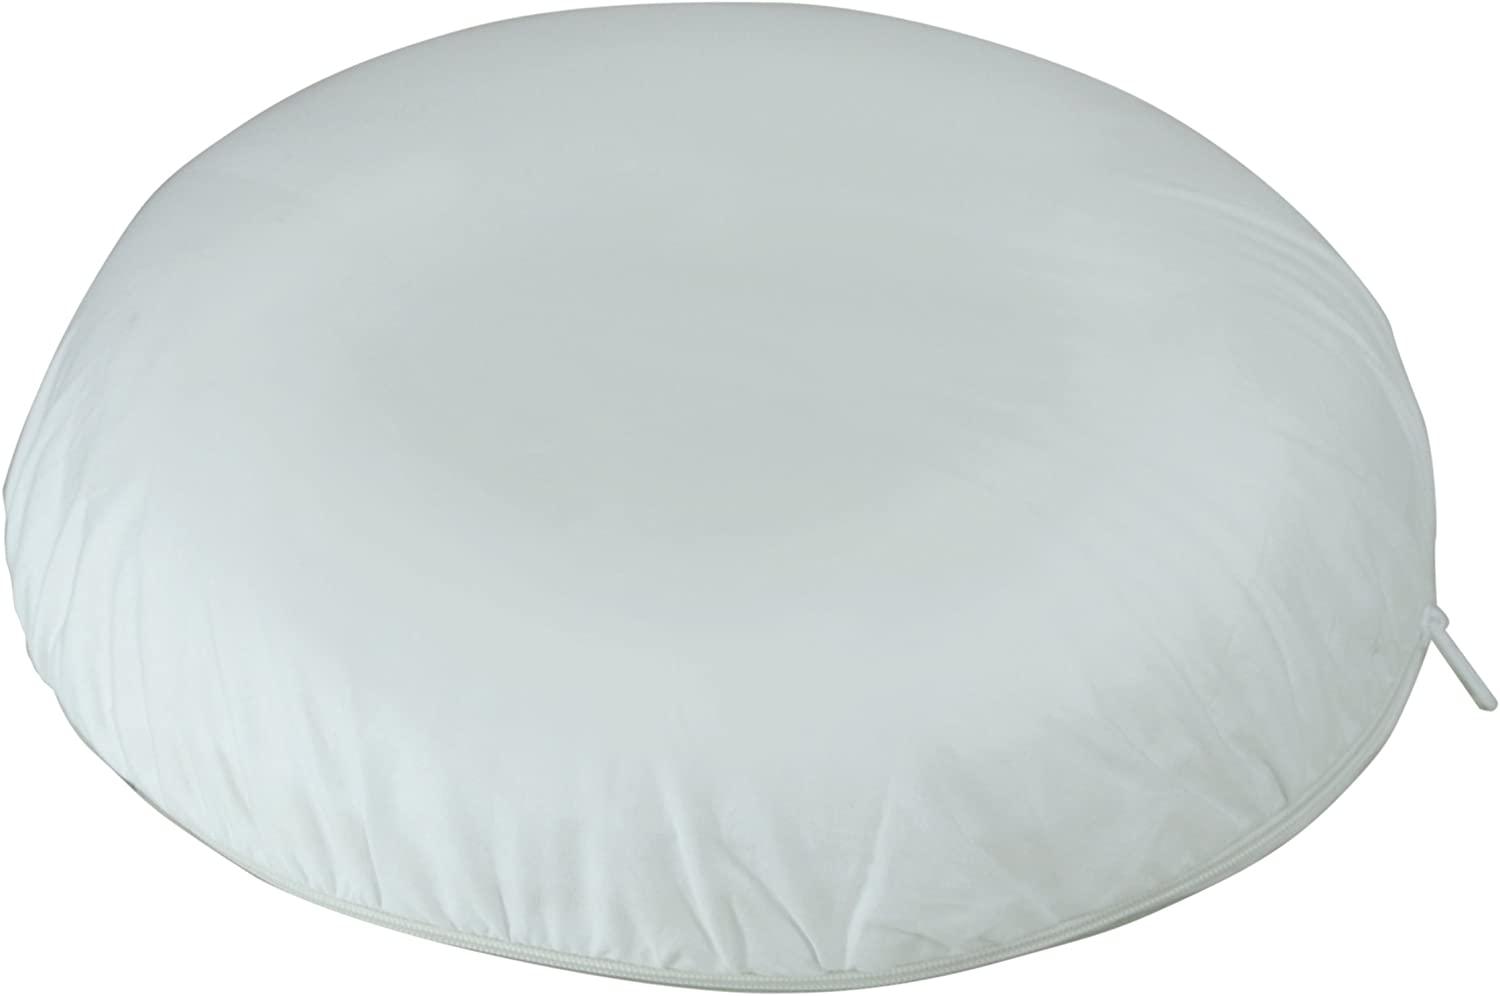 Ring Cushion for Haemorrhoid and Piles Sufferers-Seat Cushion